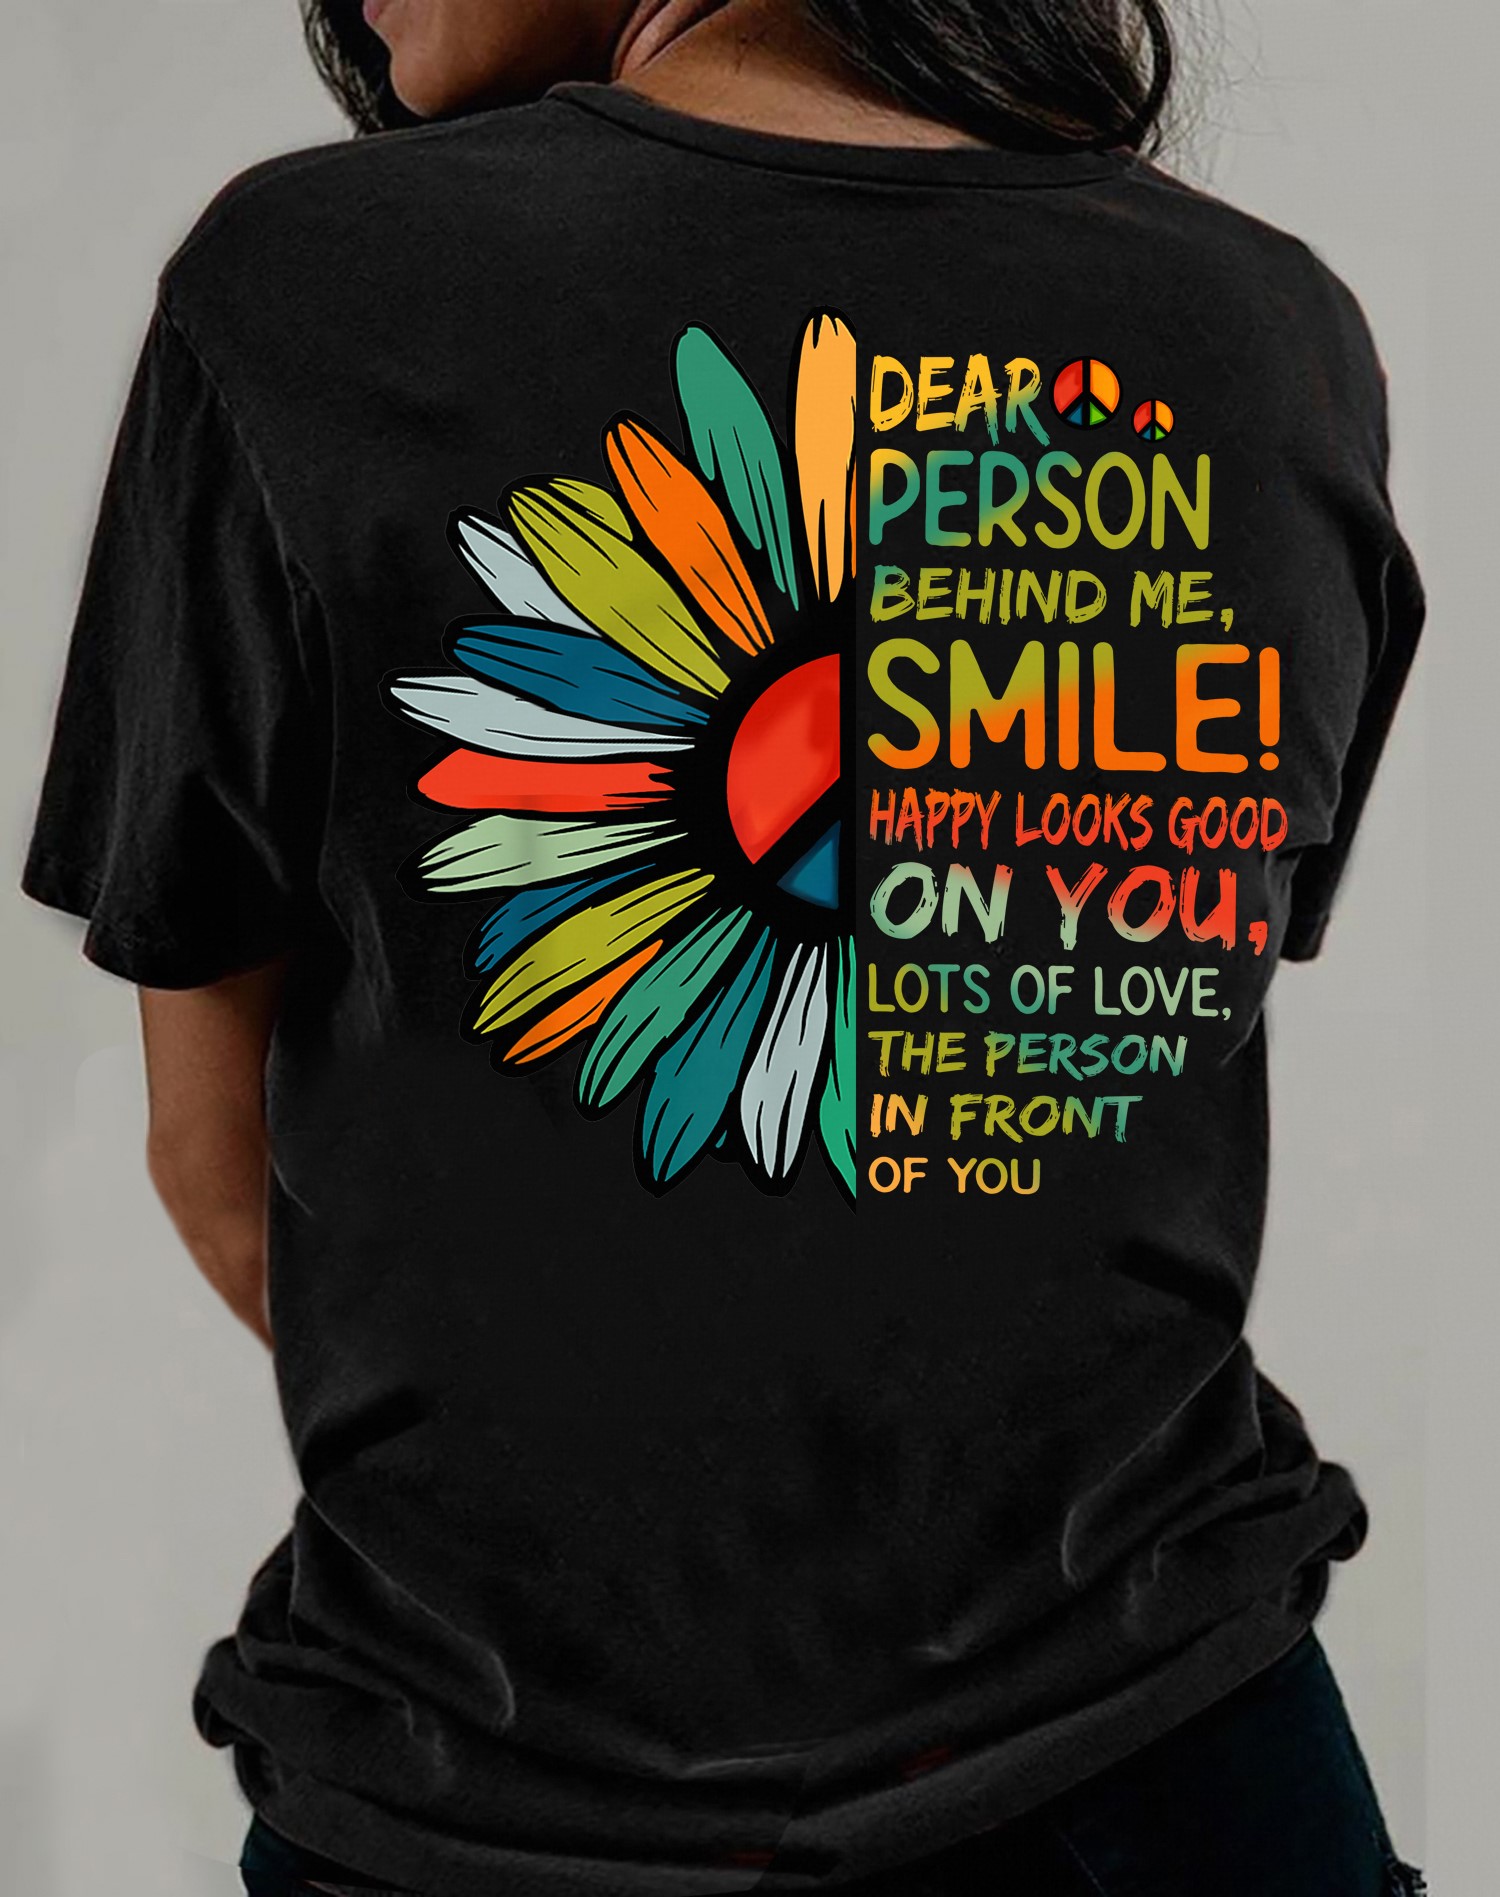 Dear person behind me, smile! Happy looks good on you, lots of love, the person in front of you